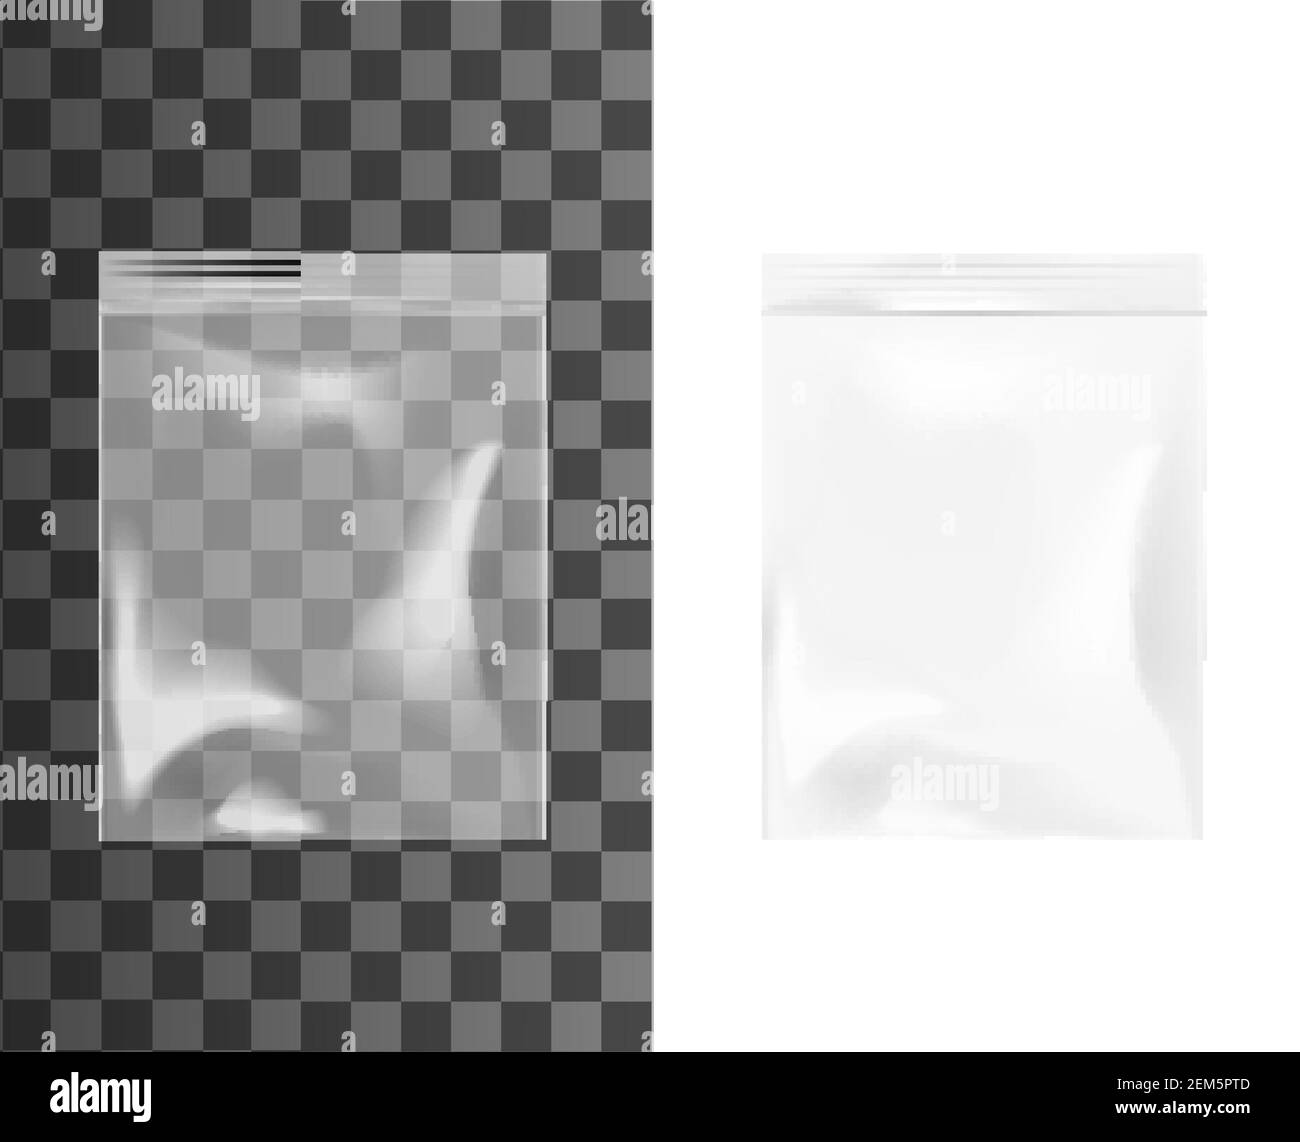 https://c8.alamy.com/comp/2EM5PTD/plastic-or-cellophane-zip-bag-realistic-isolated-3d-vector-mockup-empty-transparent-pouches-with-zippers-waterproof-disposable-blank-plastic-packag-2EM5PTD.jpg